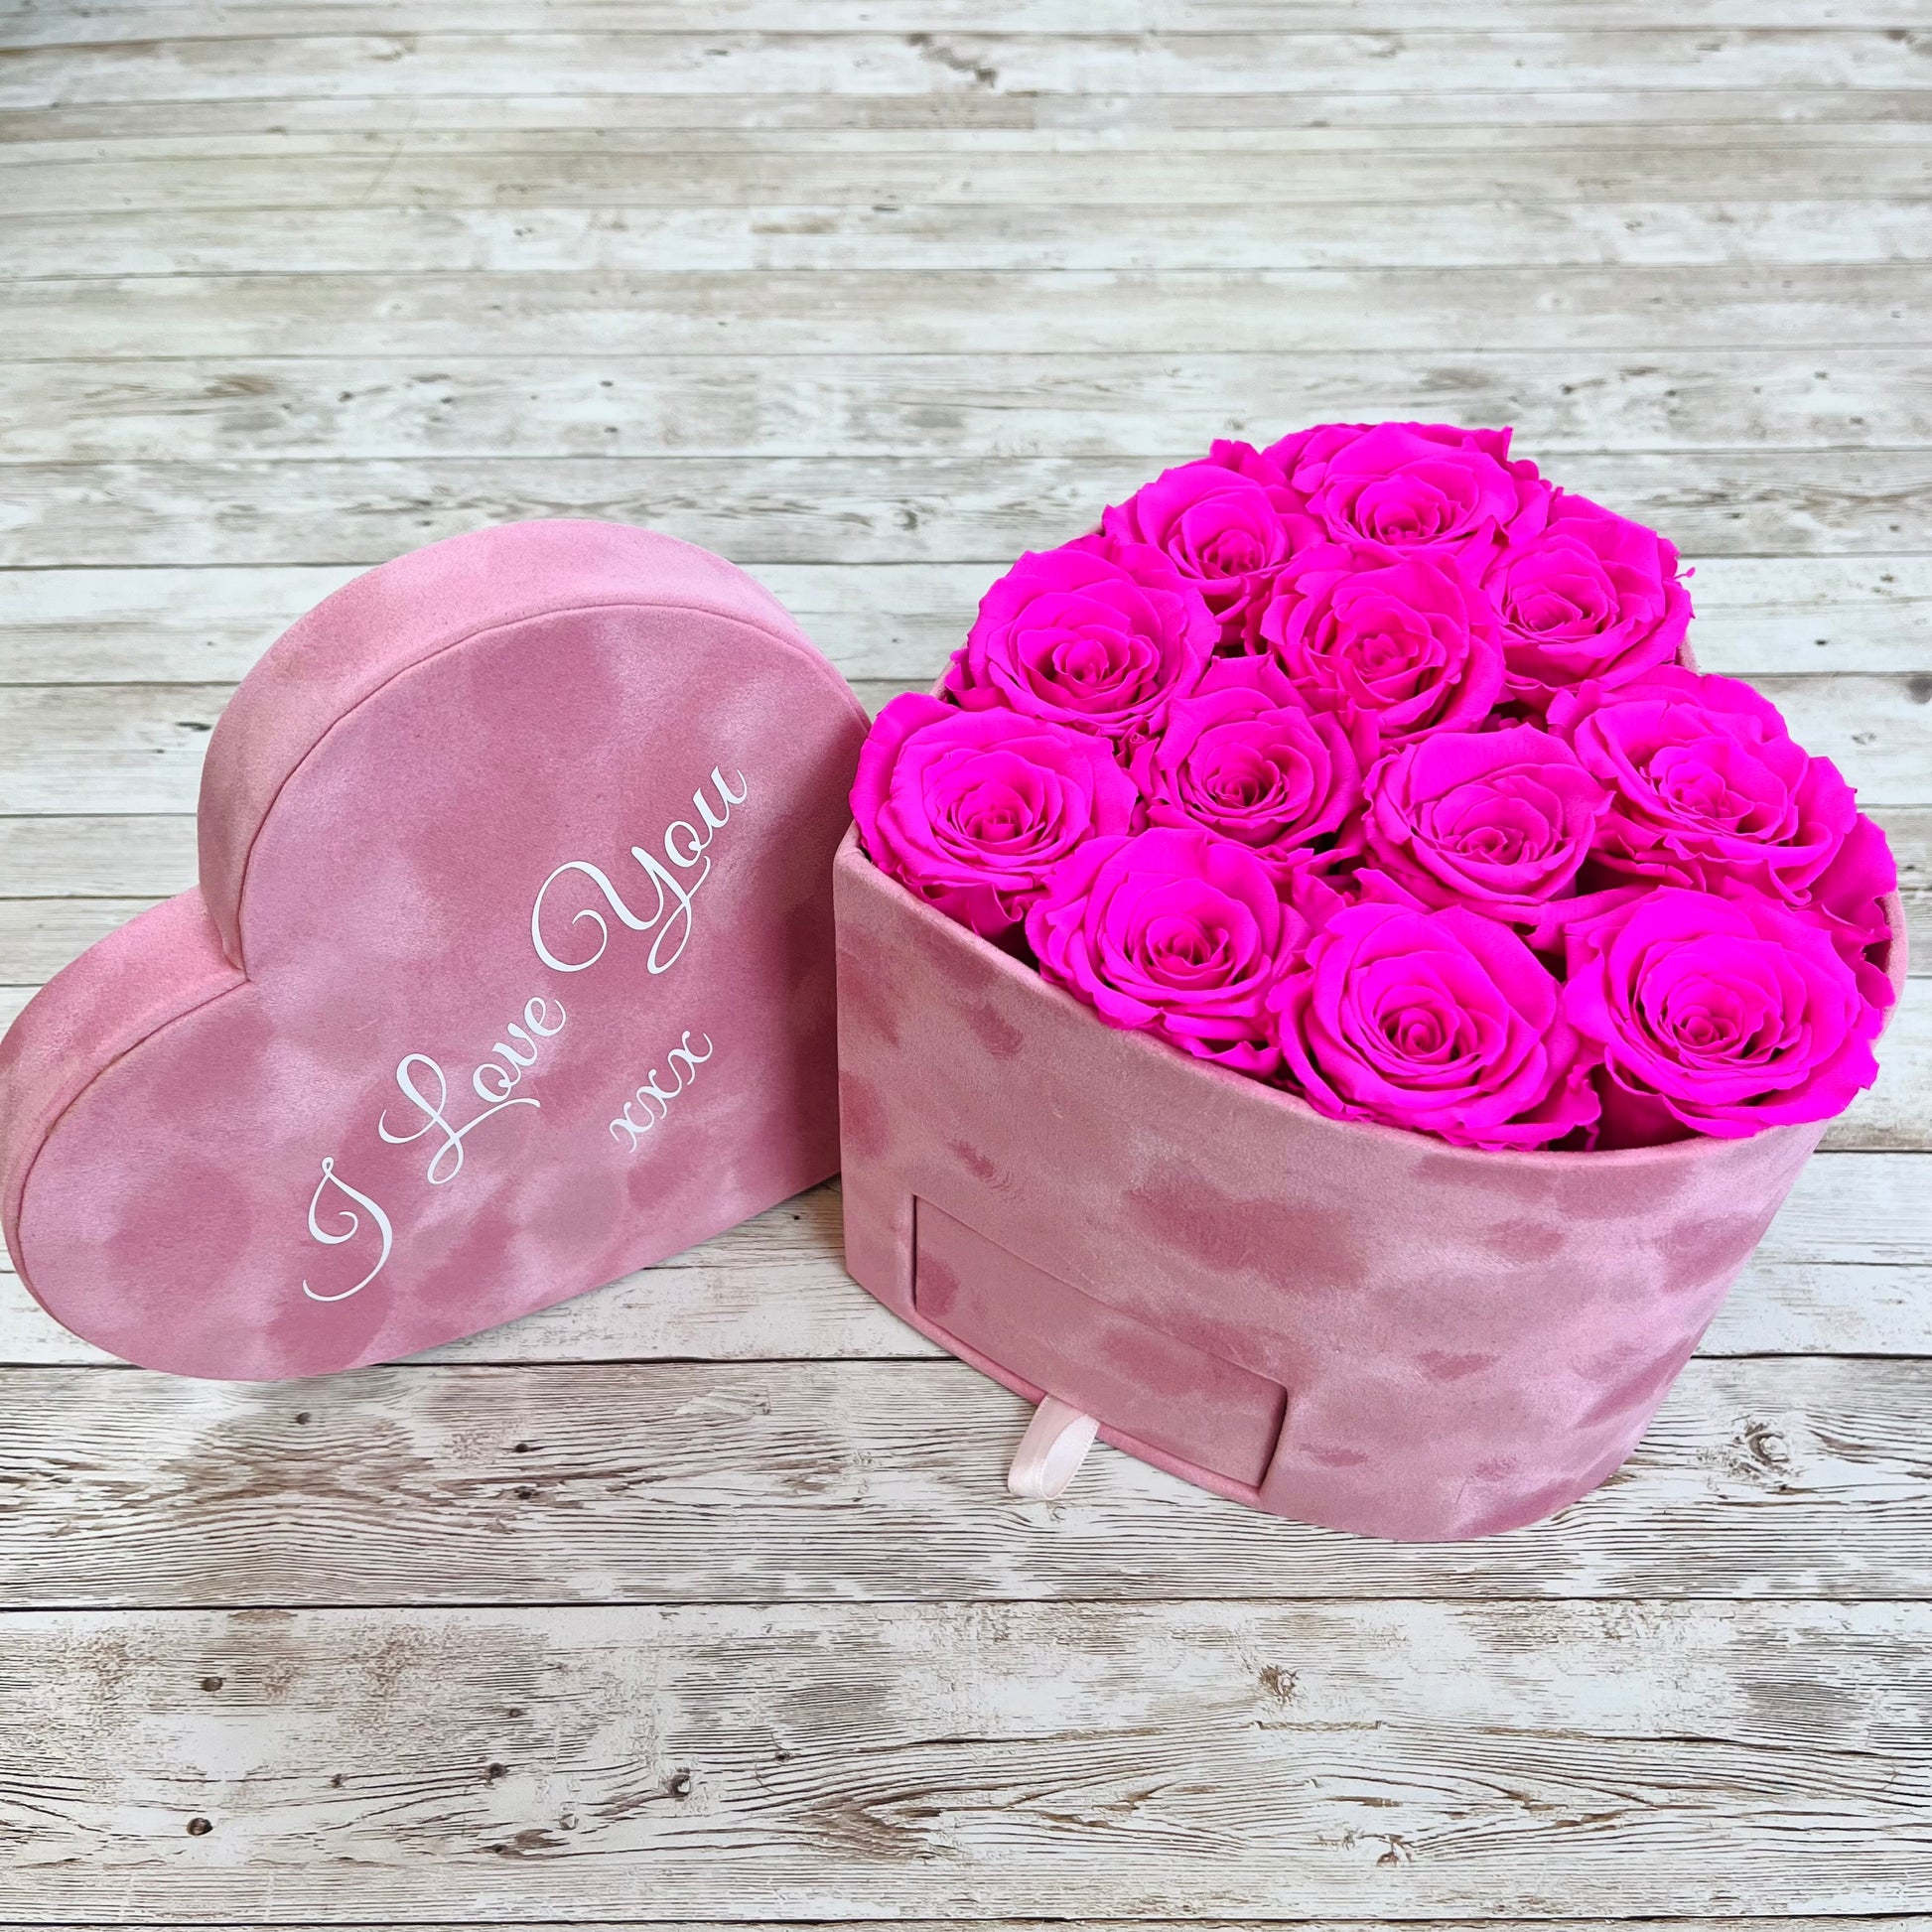 Pink Velvet Heart Infinity Rose Box - Shocking Pink One Year Roses in a Box 